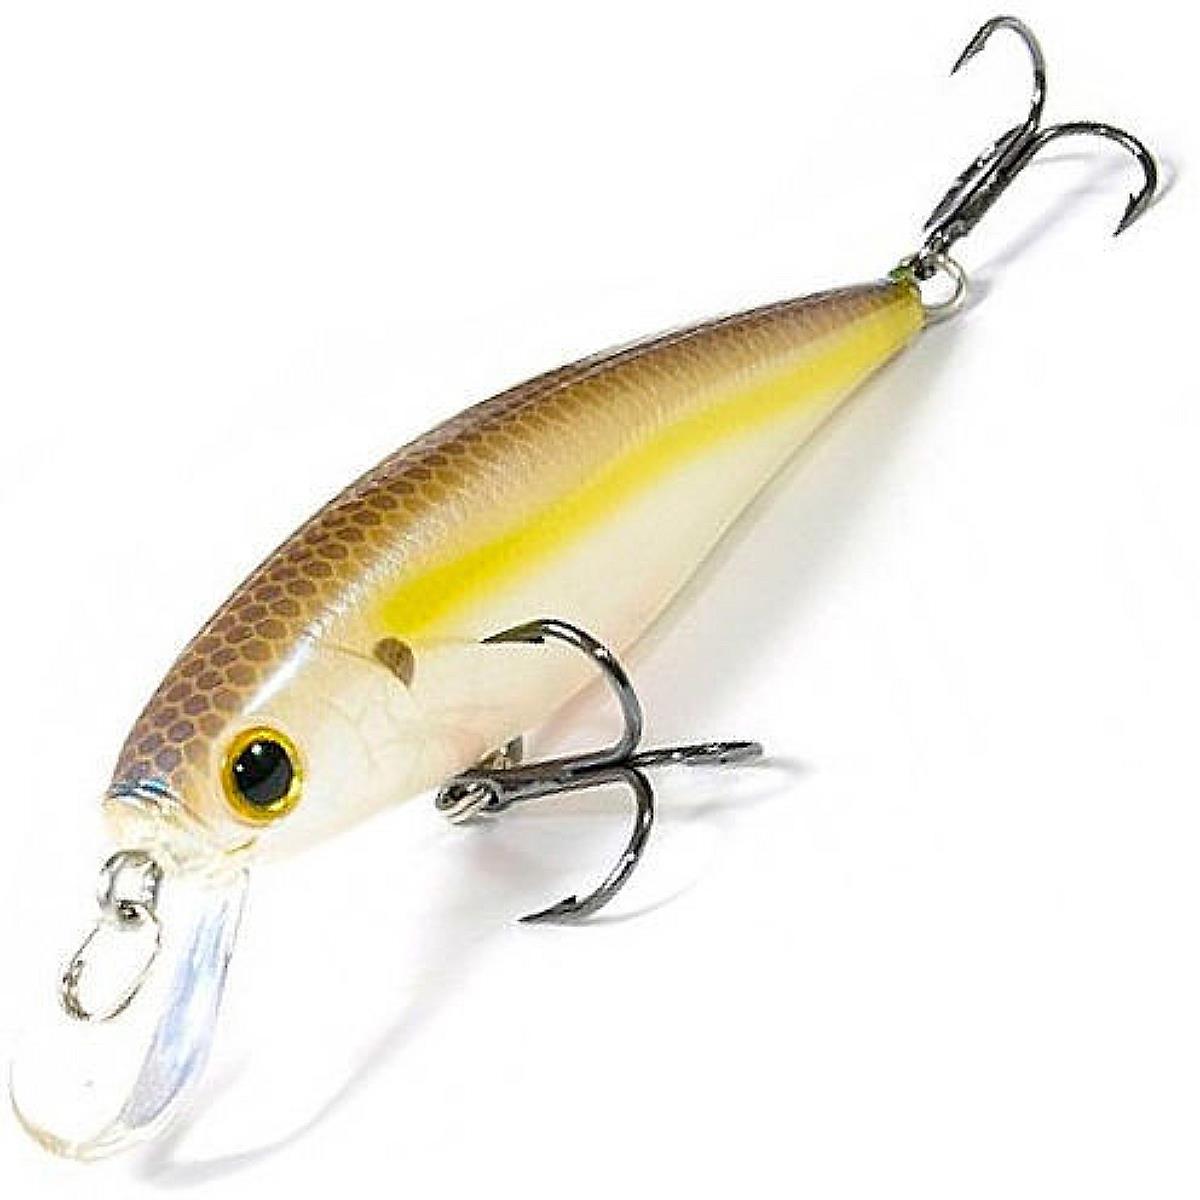 Воблер Pointer 78-250 Chartreuse Shad Lucky Craft воблер clutch ssr 270 ms american shad lucky craft